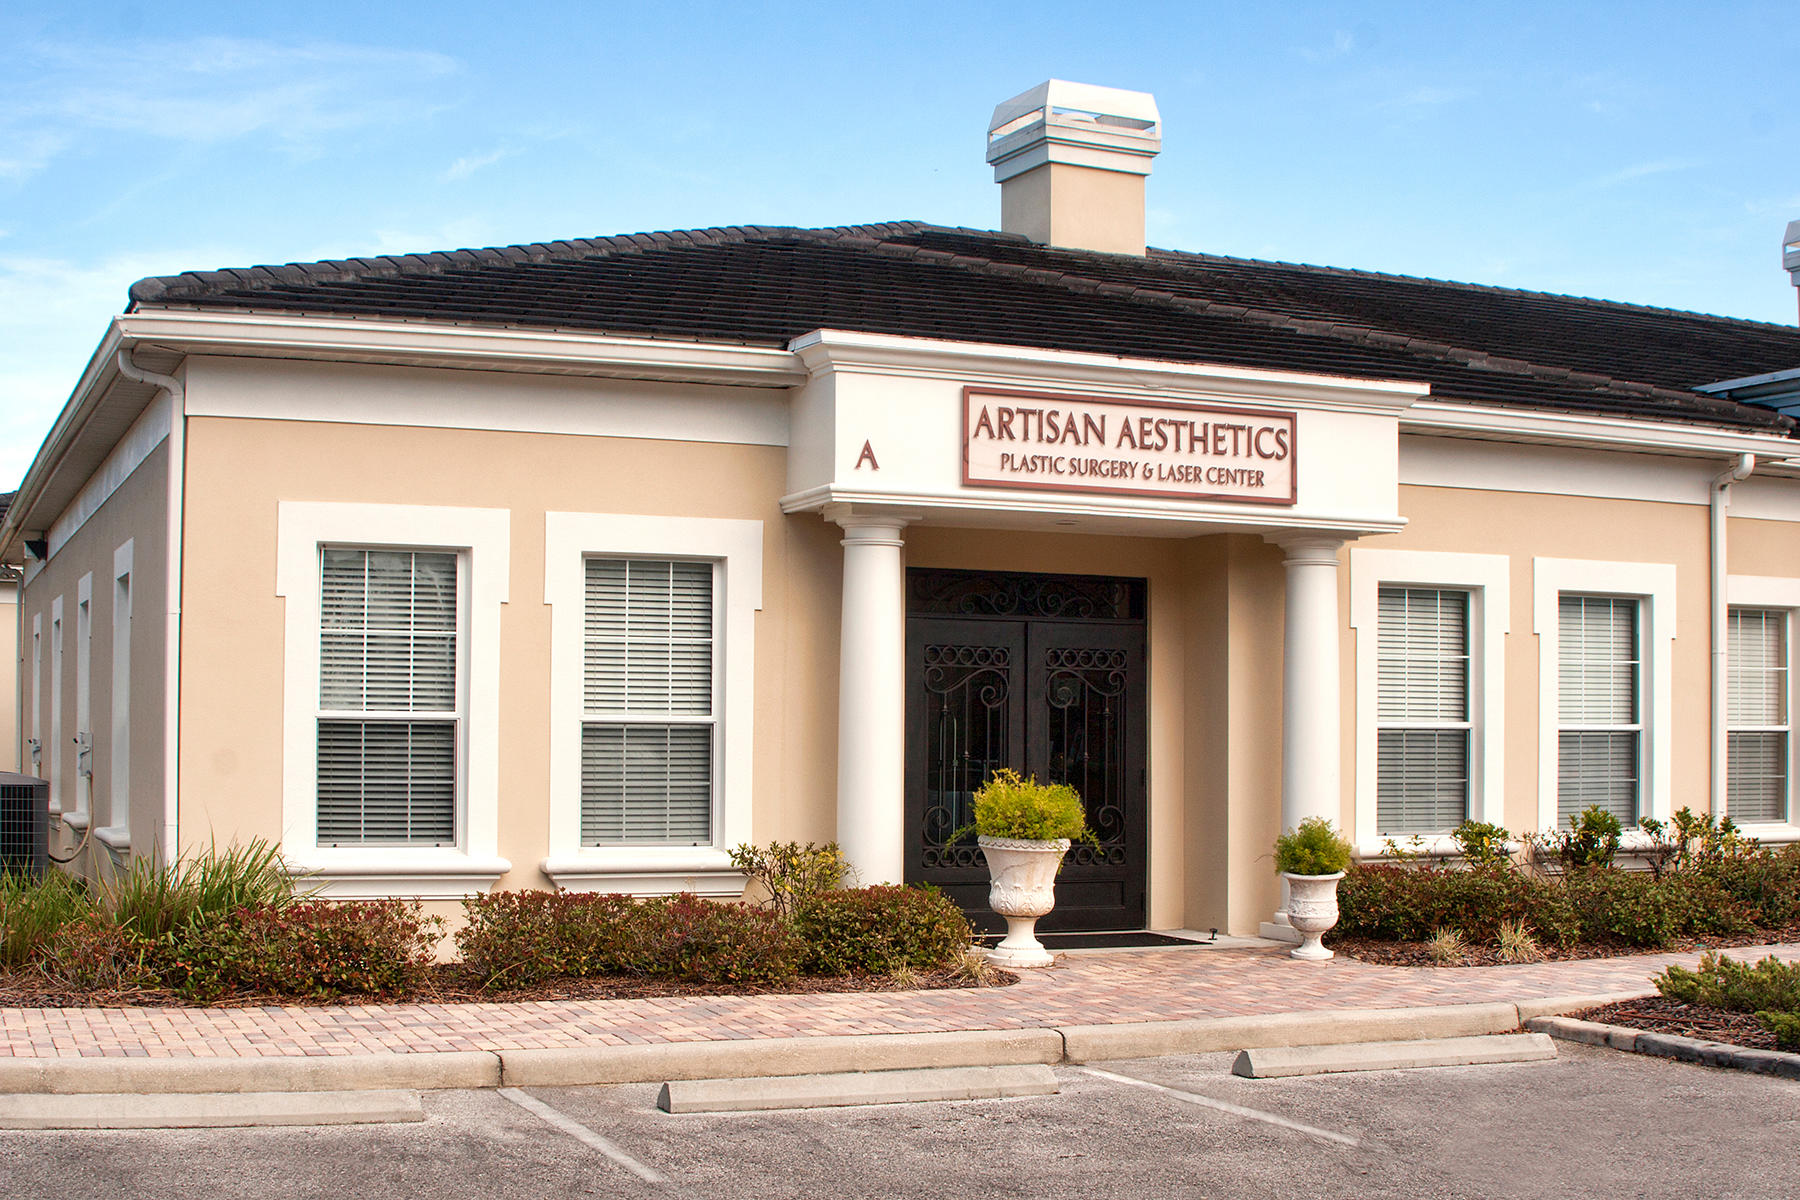 The front of the building of Artisan Aesthetics Plastic Surgery & Laser Center located in Tampa, Florida